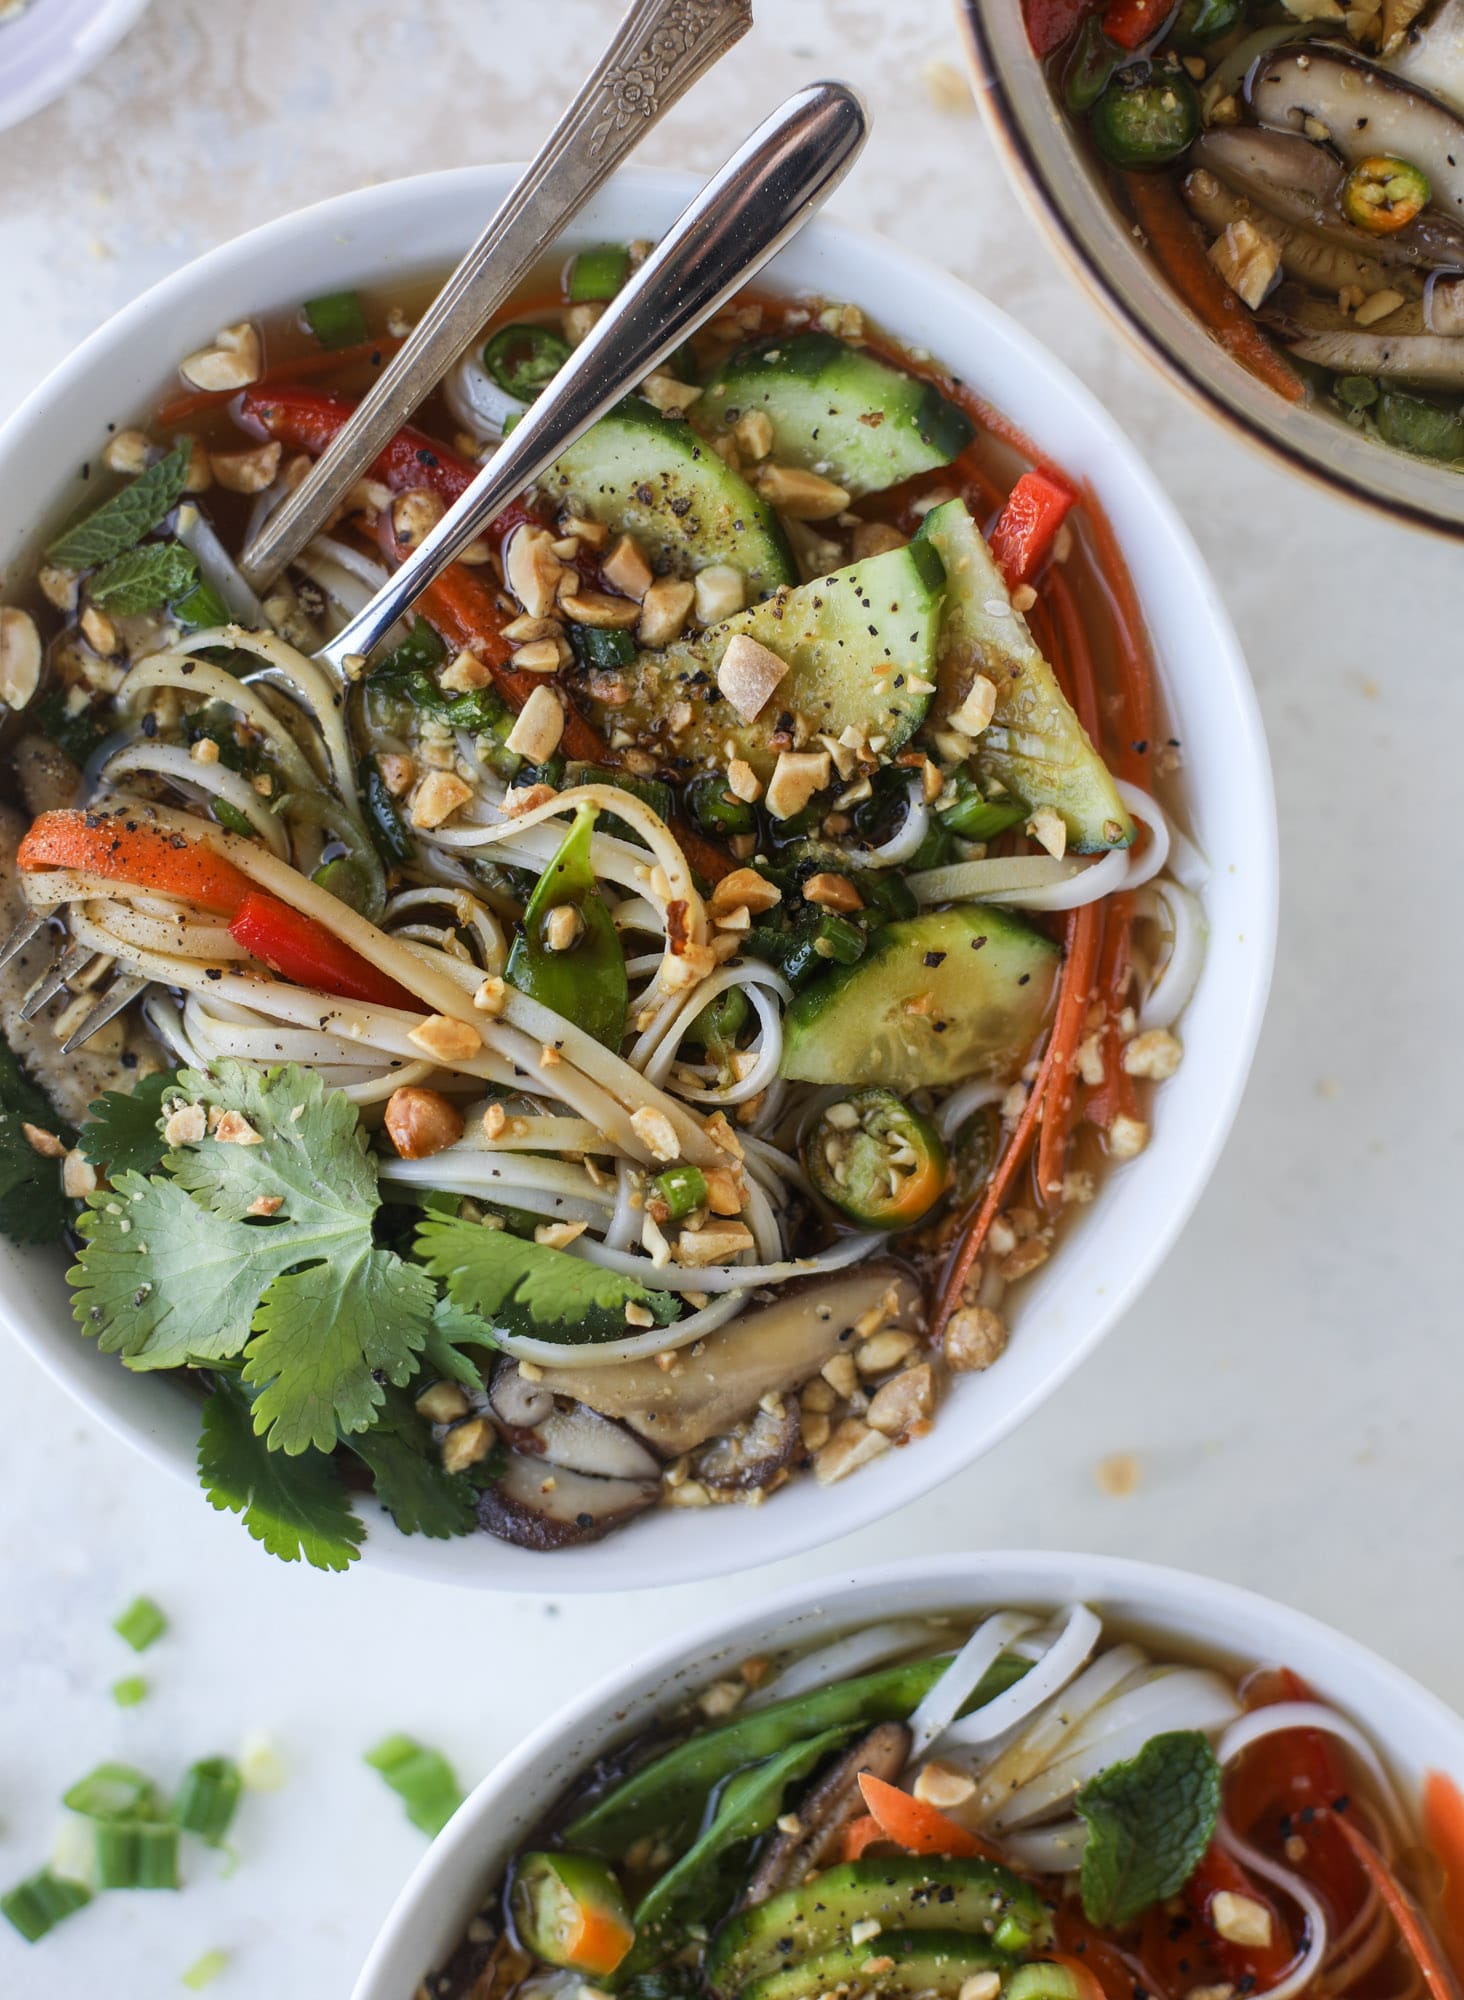 Ginger scallion noodle bowls are a flavorful, comforting vegetarian meal that can be customized to include any veggies you love! I howsweeteats.com #noodle #bowls